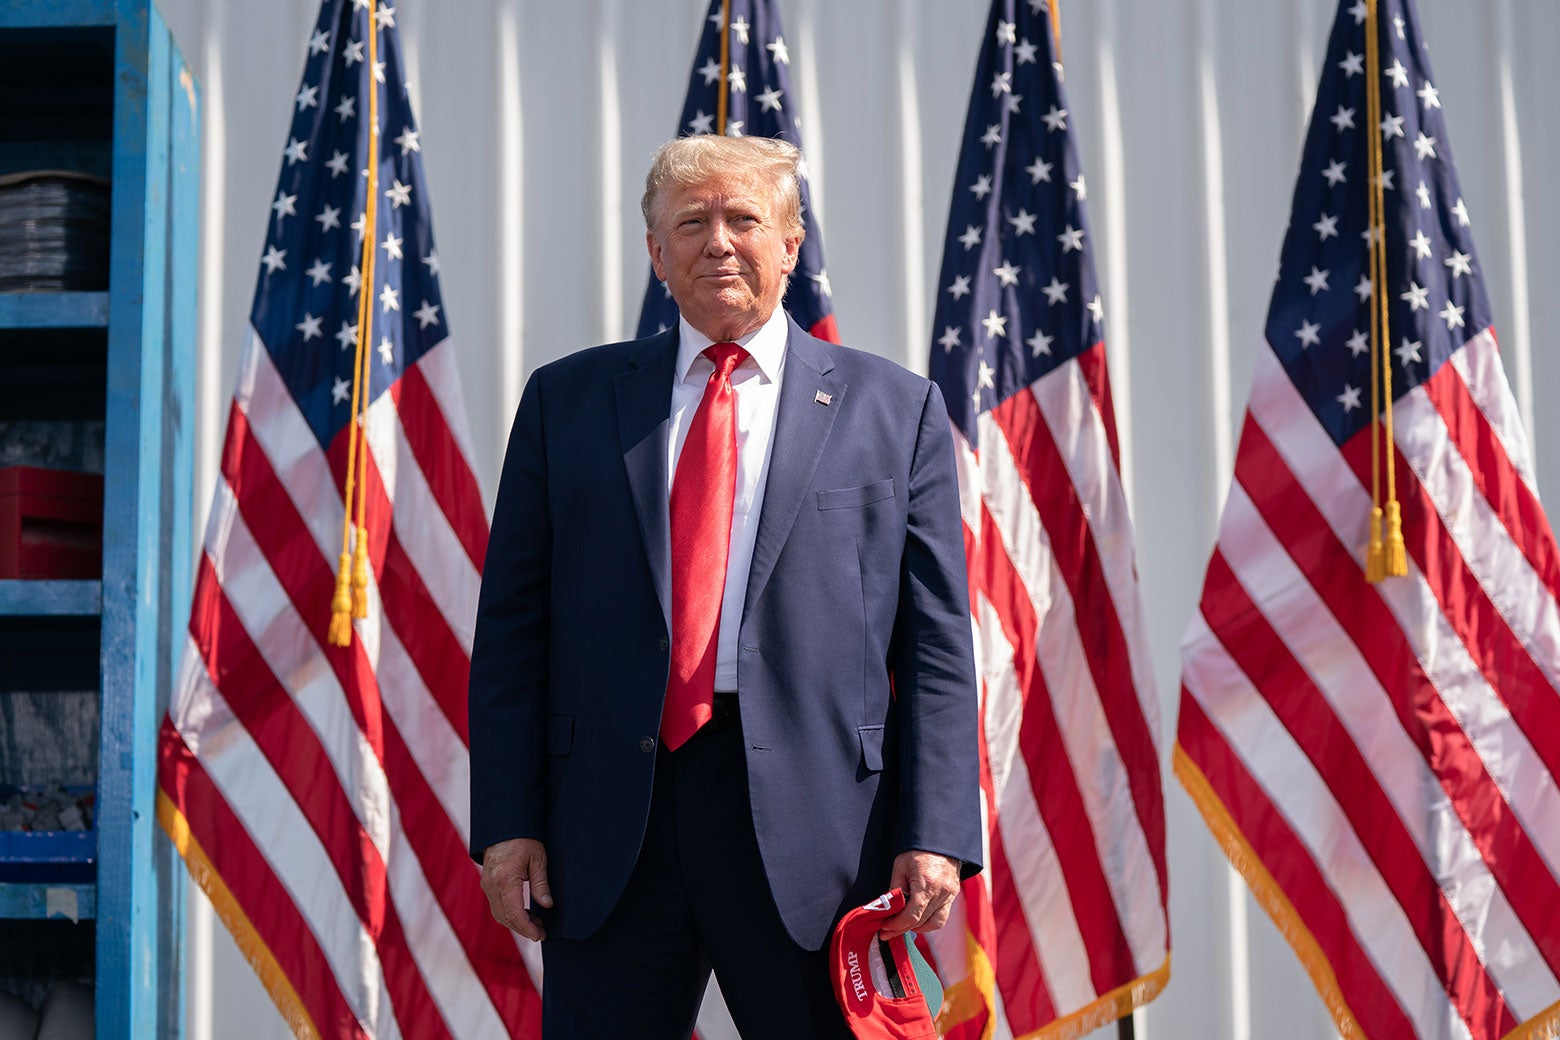 Trump smiling as he stands in a sea of flags.